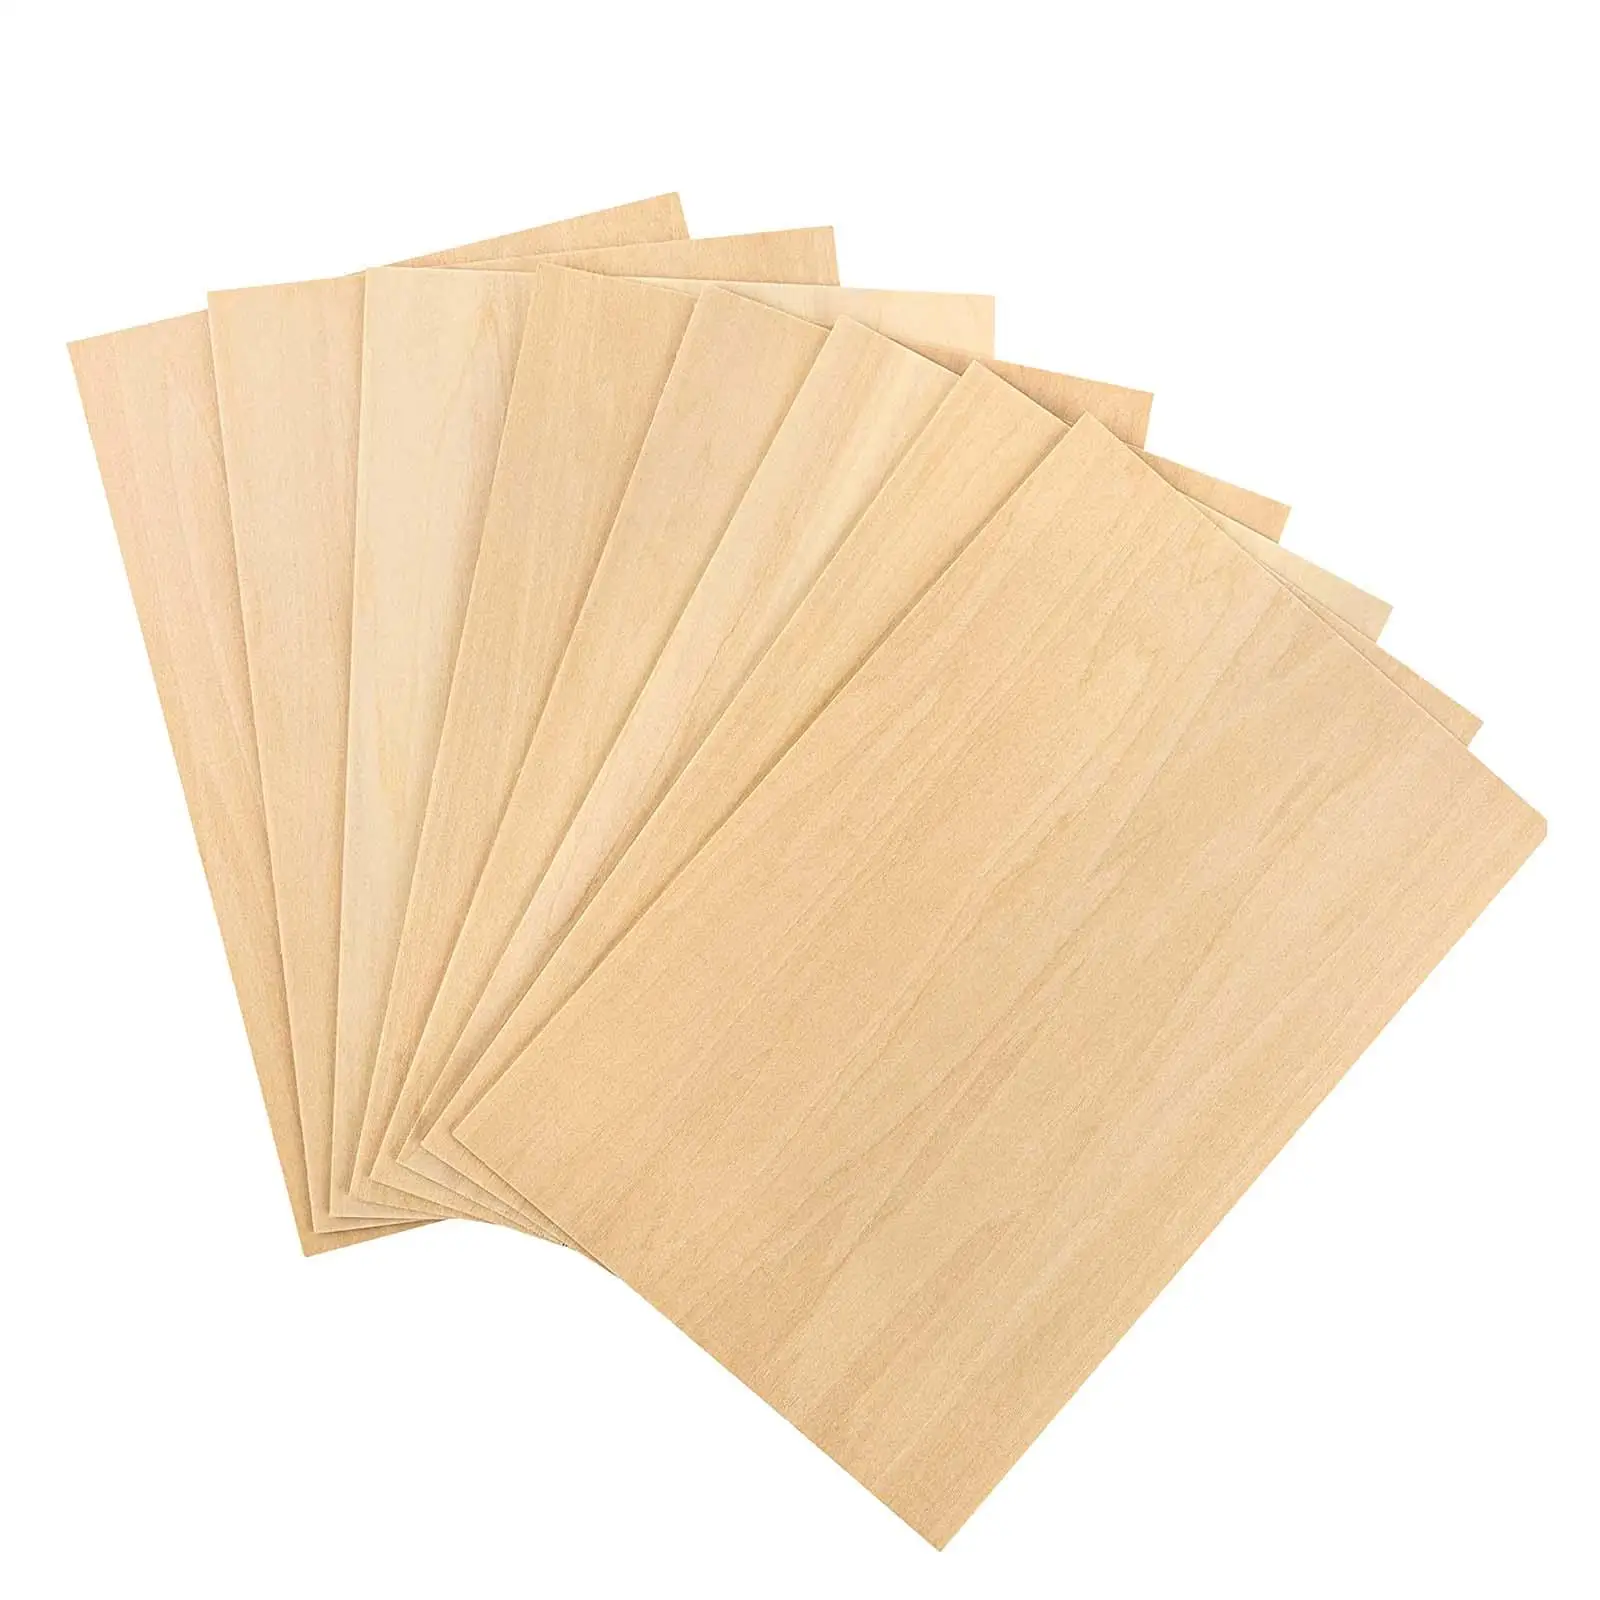 8x Unfinished Wood Thin Plywood Board Wood Sheets Board for DIY Project Miniature Aircraft Crafts Sailboat Models Mini House